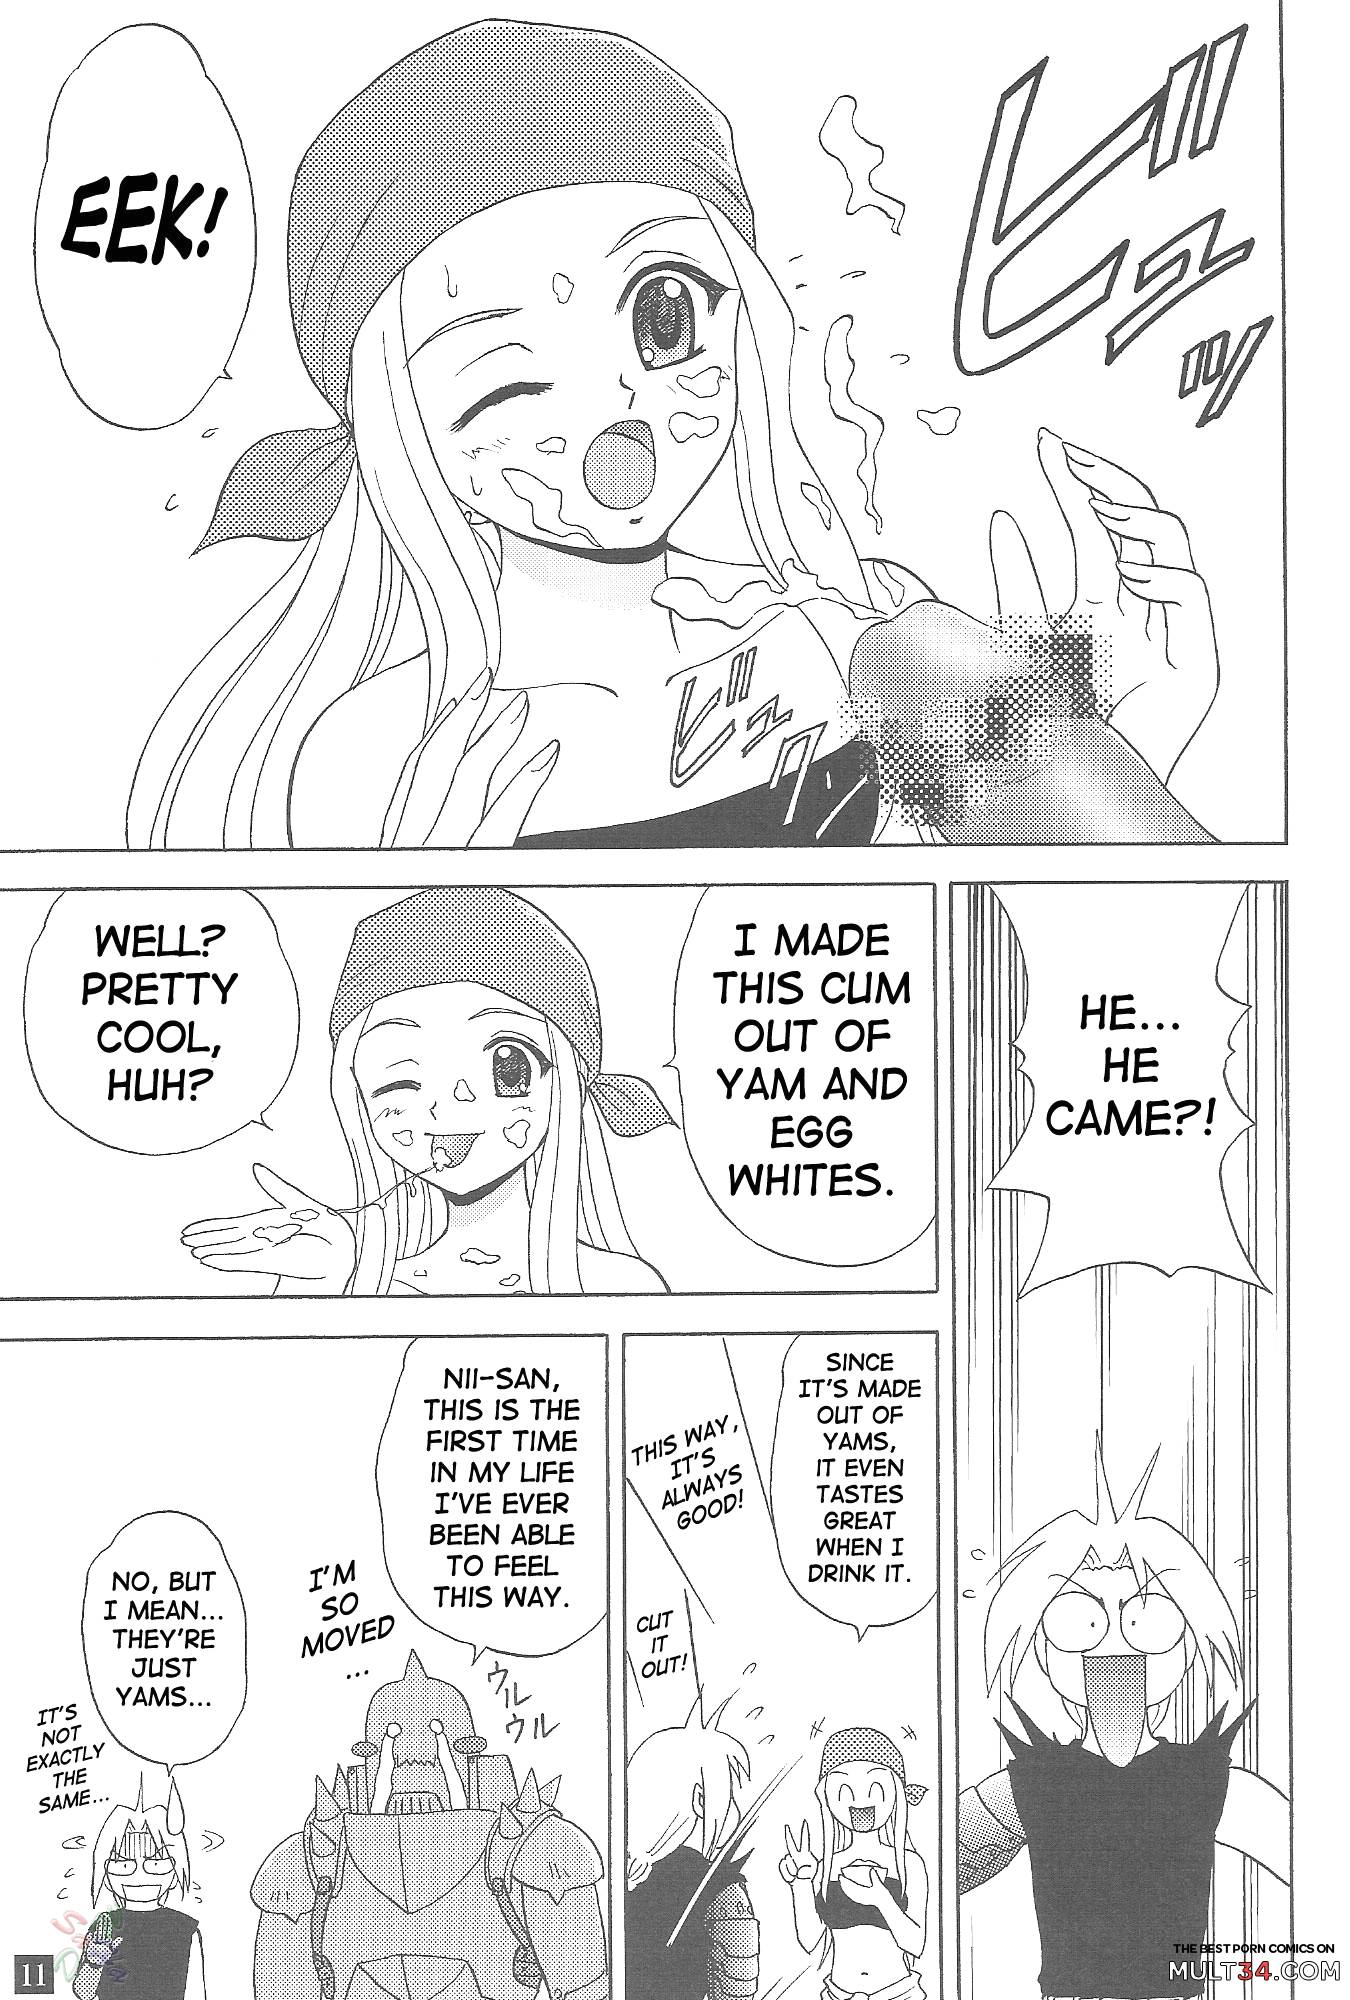 Winry's Vibrator page 10